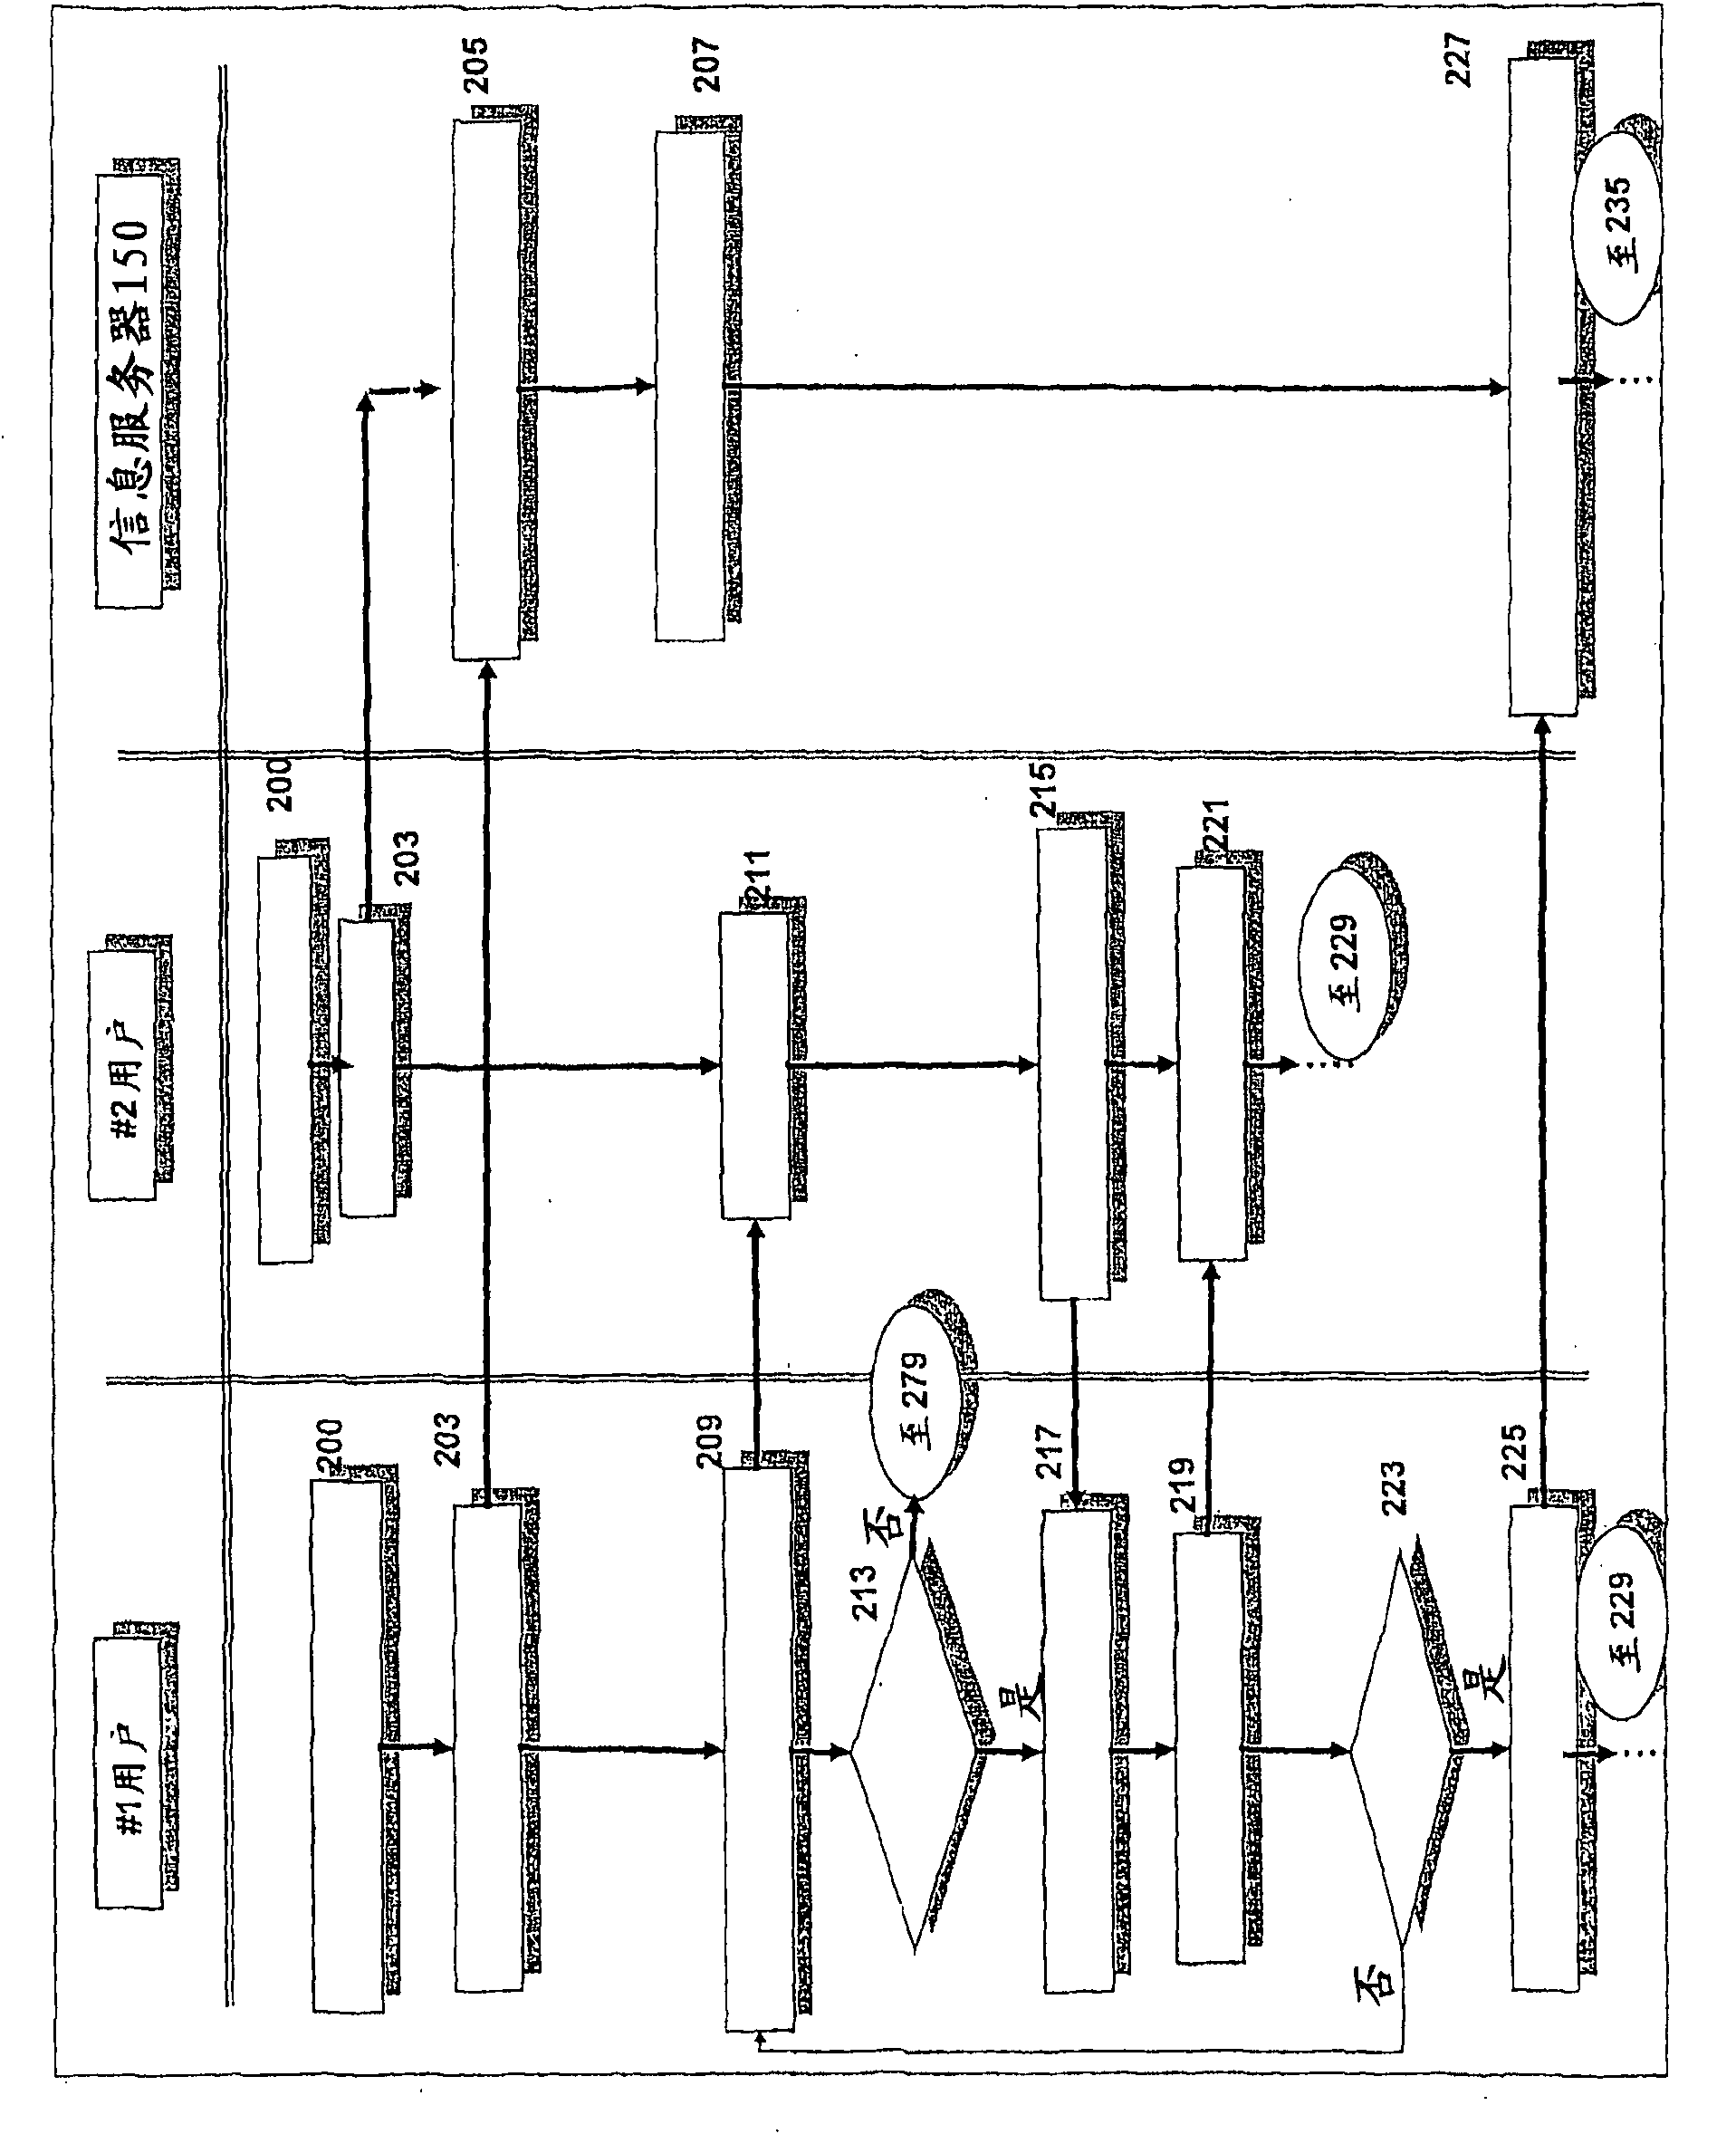 Method for managing anonymous communication between users according to short-distance wireless connection identifier